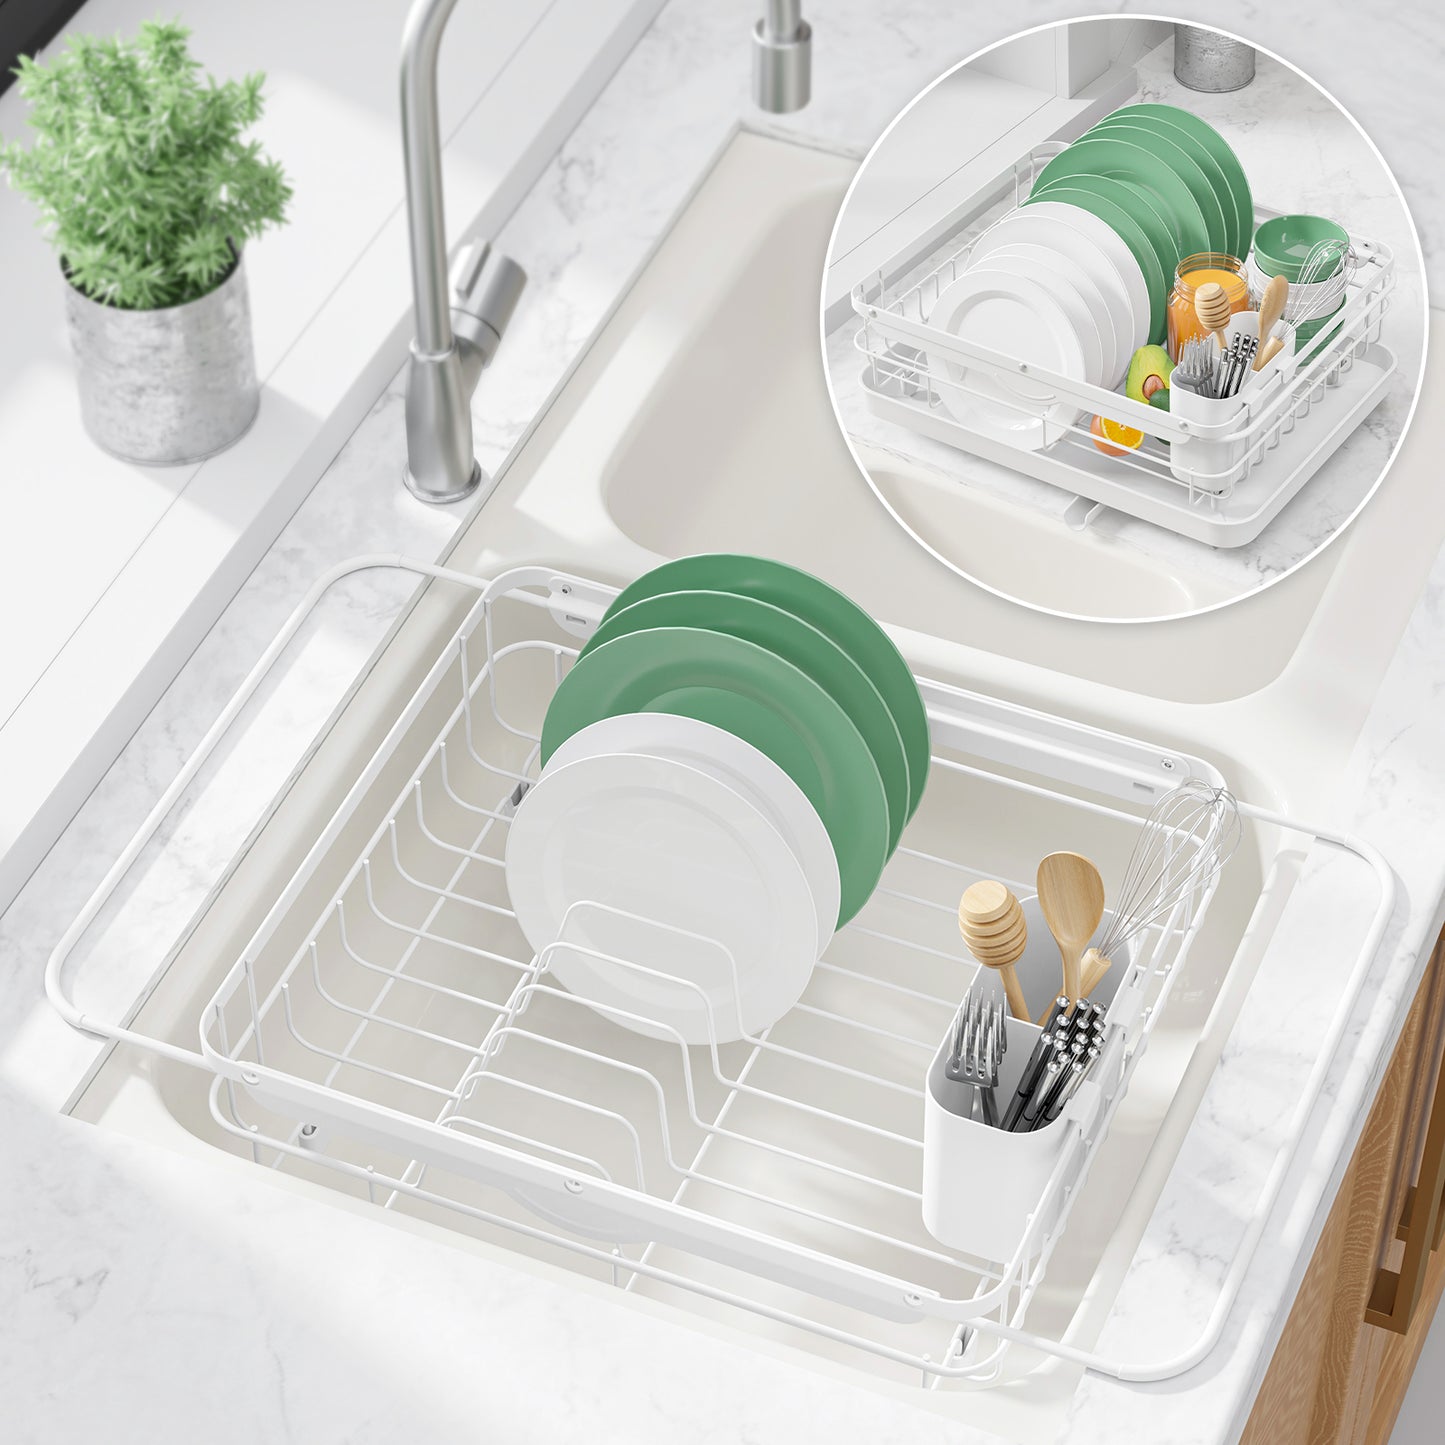 Kitsure Dish Drying Rack- Space-Saving Dish Rack, Dish Racks for Kitchen Counter and Sink, Stainless Steel Kitchen Drying Rack with a Cutlery Holder,12''W x 14''~23''L（4003）